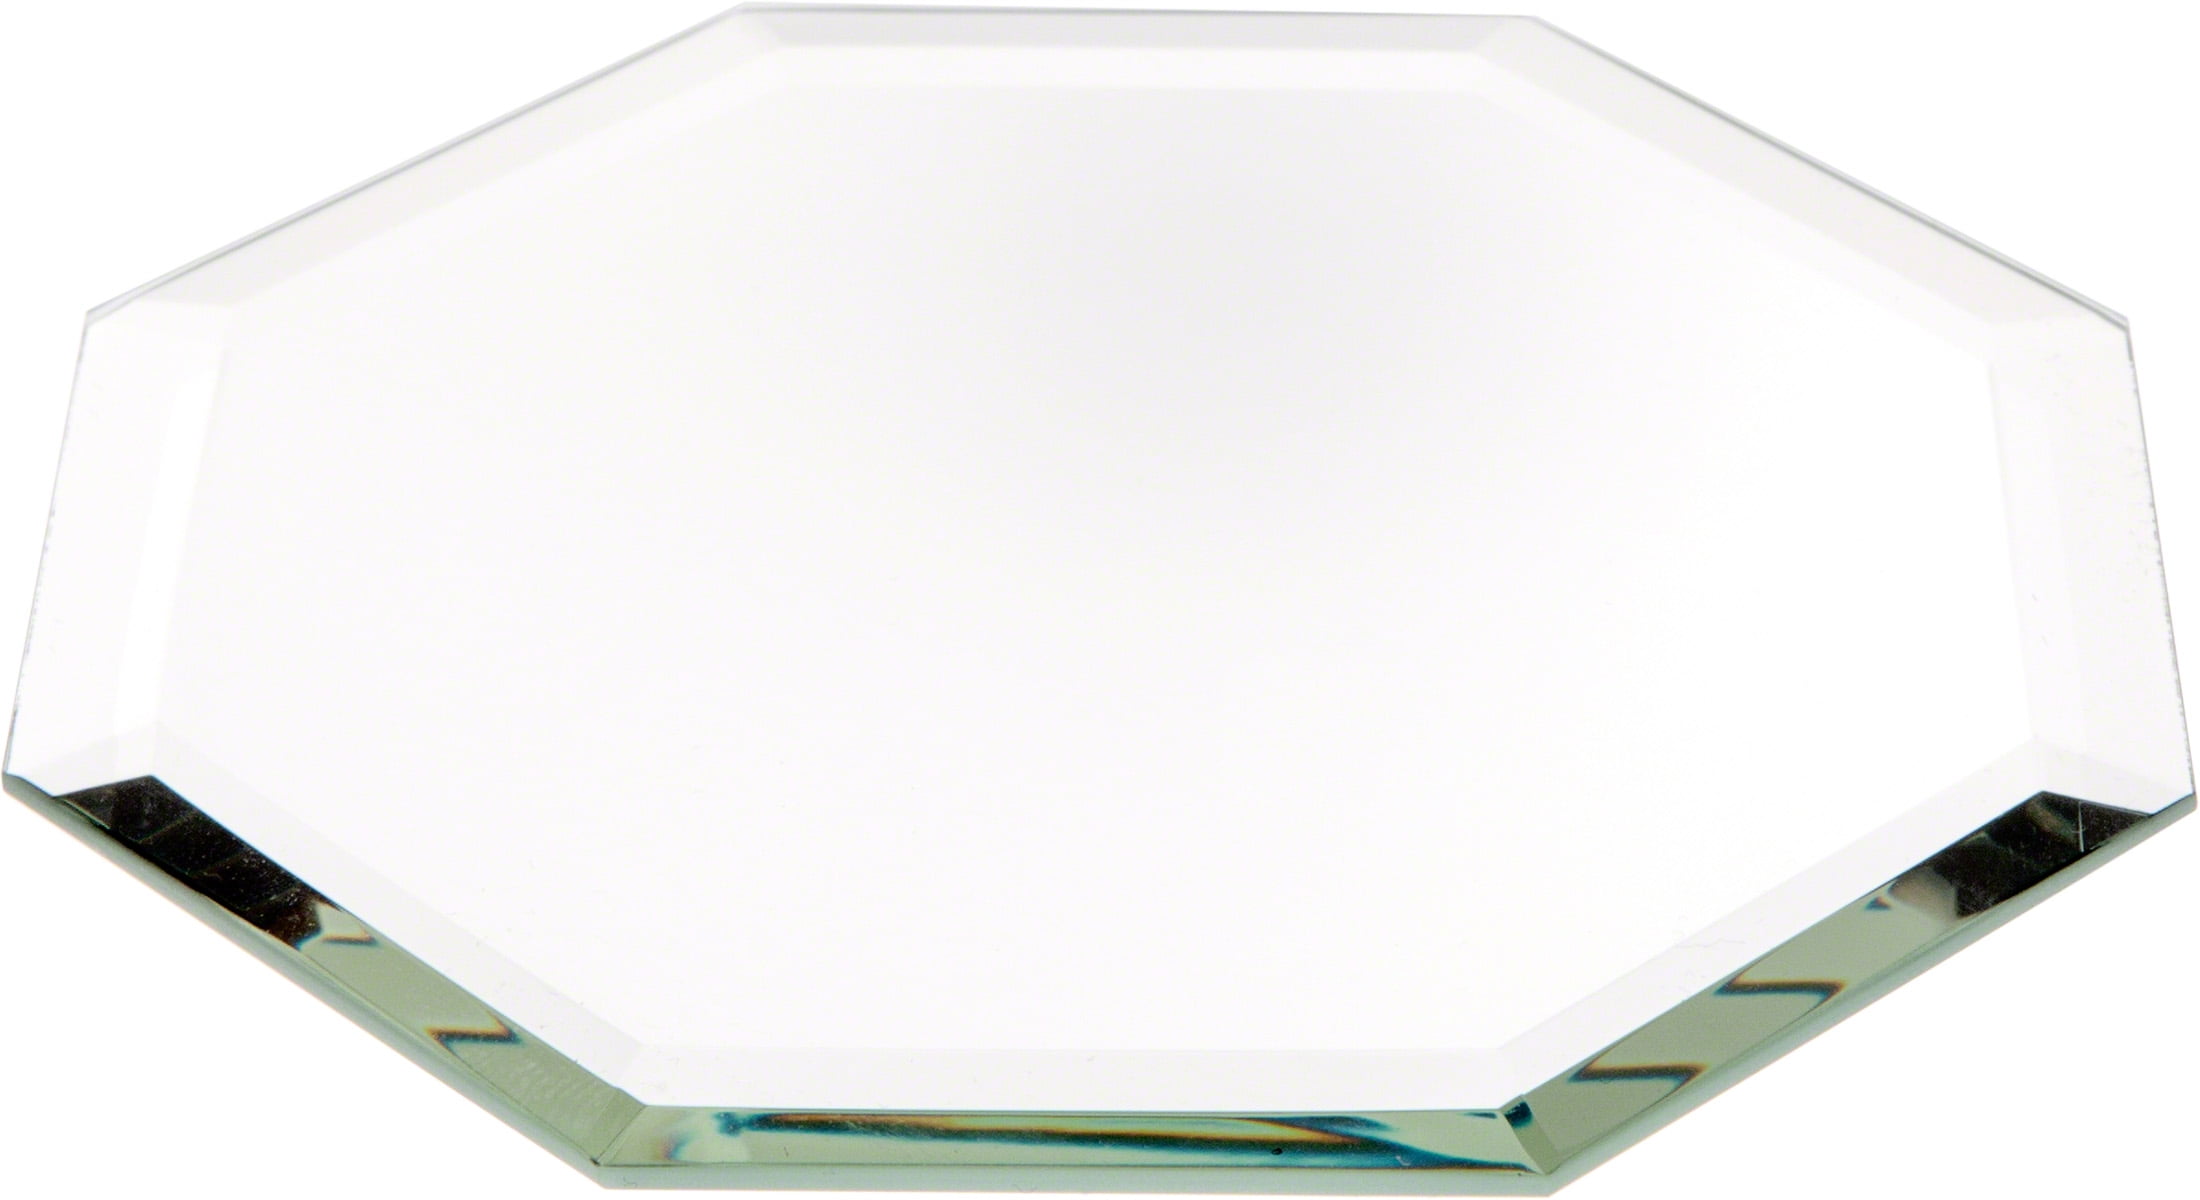 2 inch x 2 inch Plymor Square 3mm Beveled Glass Mirror Pack of 12 